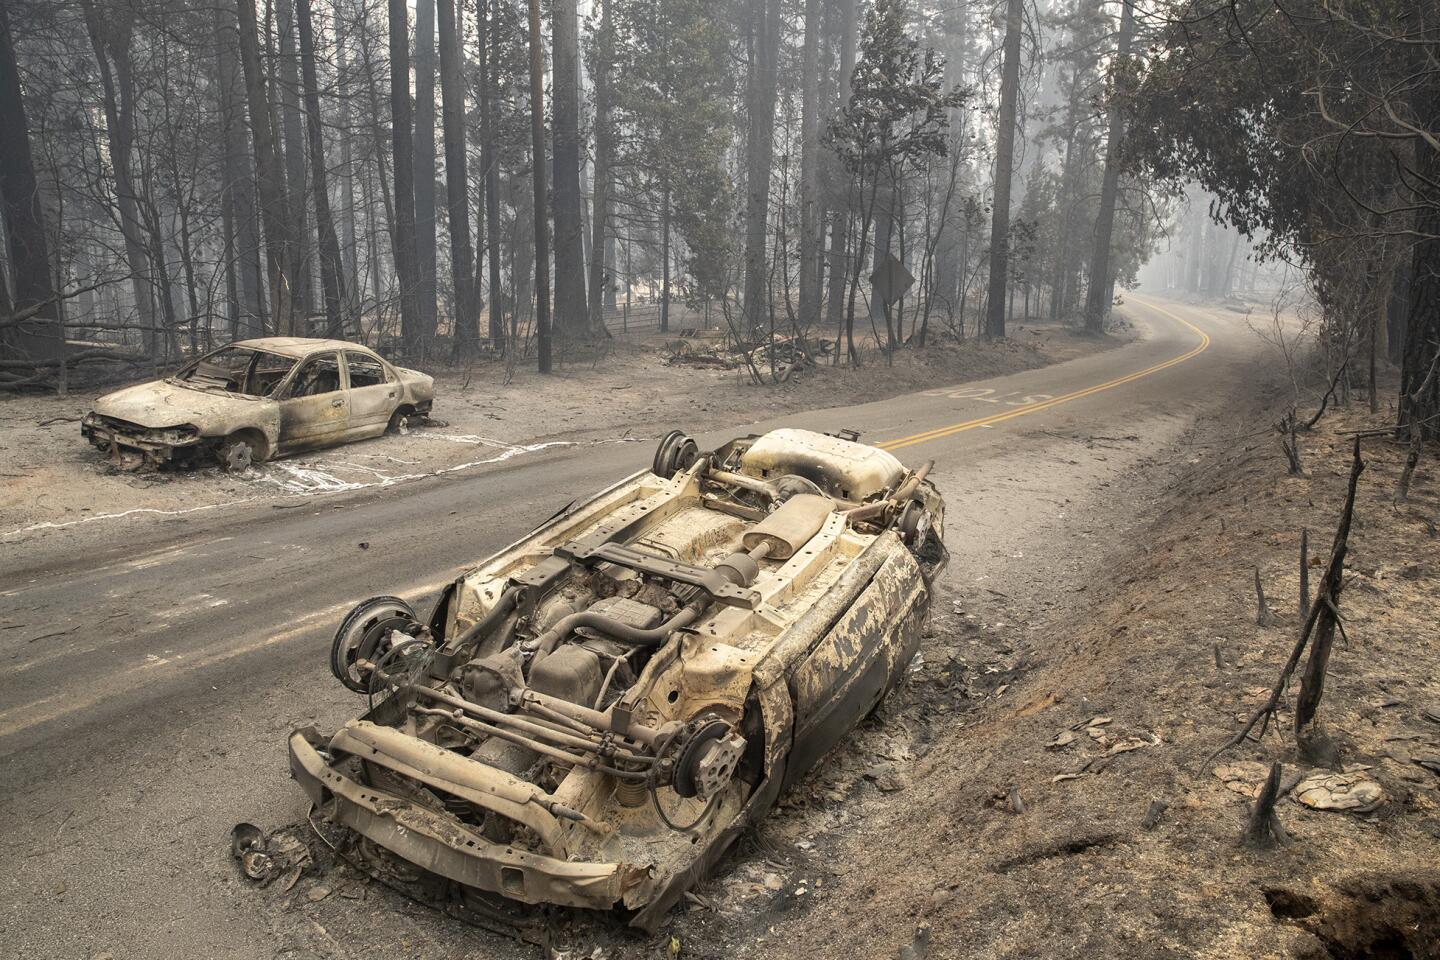 Scorched cars on an ash-covered road.